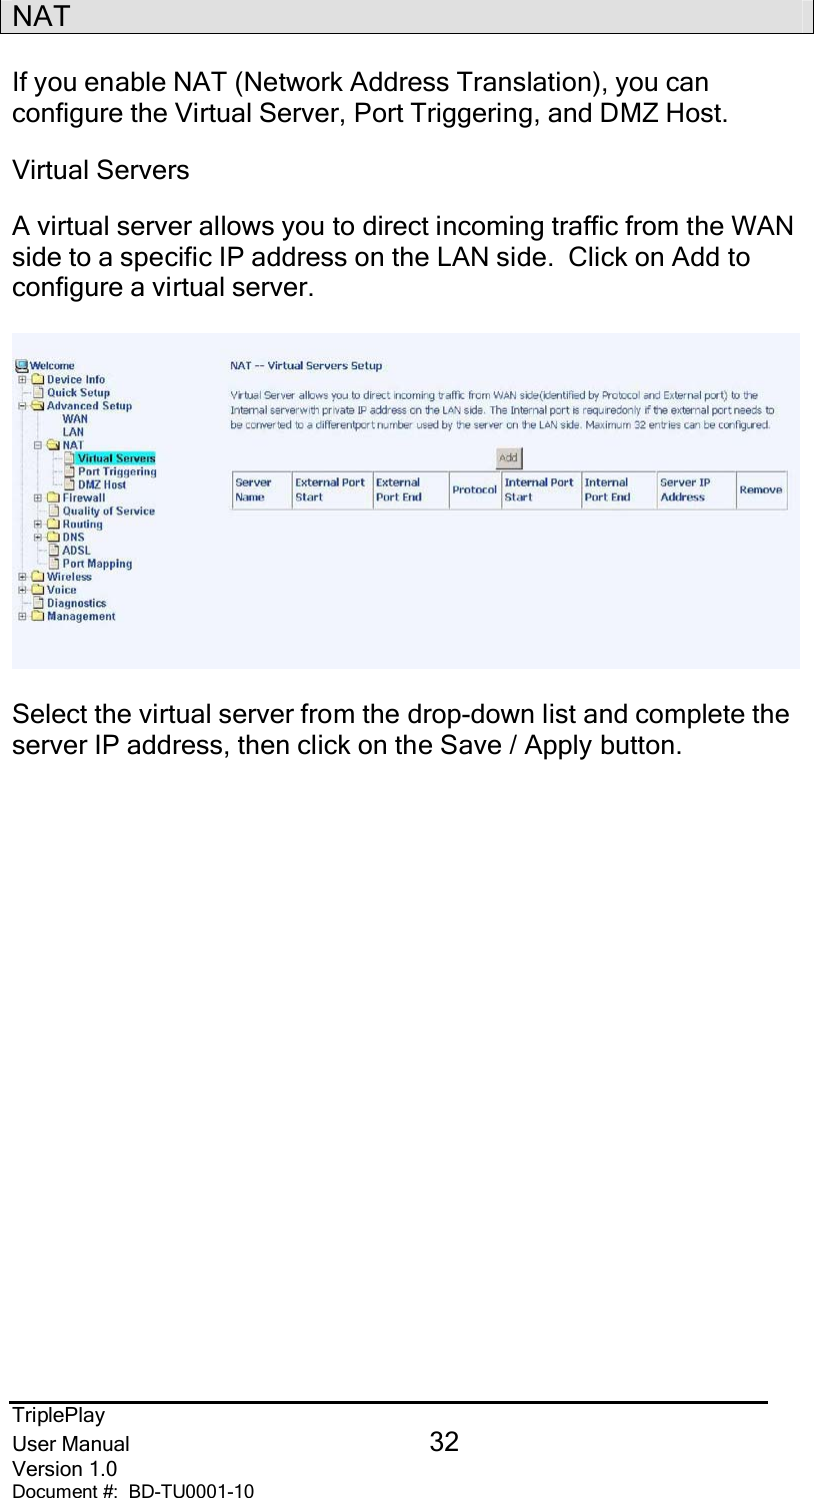 TriplePlayUser Manual 32Version 1.0Document #:  BD-TU0001-10NATIf you enable NAT (Network Address Translation), you canconfigure the Virtual Server, Port Triggering, and DMZ Host.Virtual ServersA virtual server allows you to direct incoming traffic from the WANside to a specific IP address on the LAN side.  Click on Add toconfigure a virtual server.Select the virtual server from the drop-down list and complete theserver IP address, then click on the Save / Apply button.